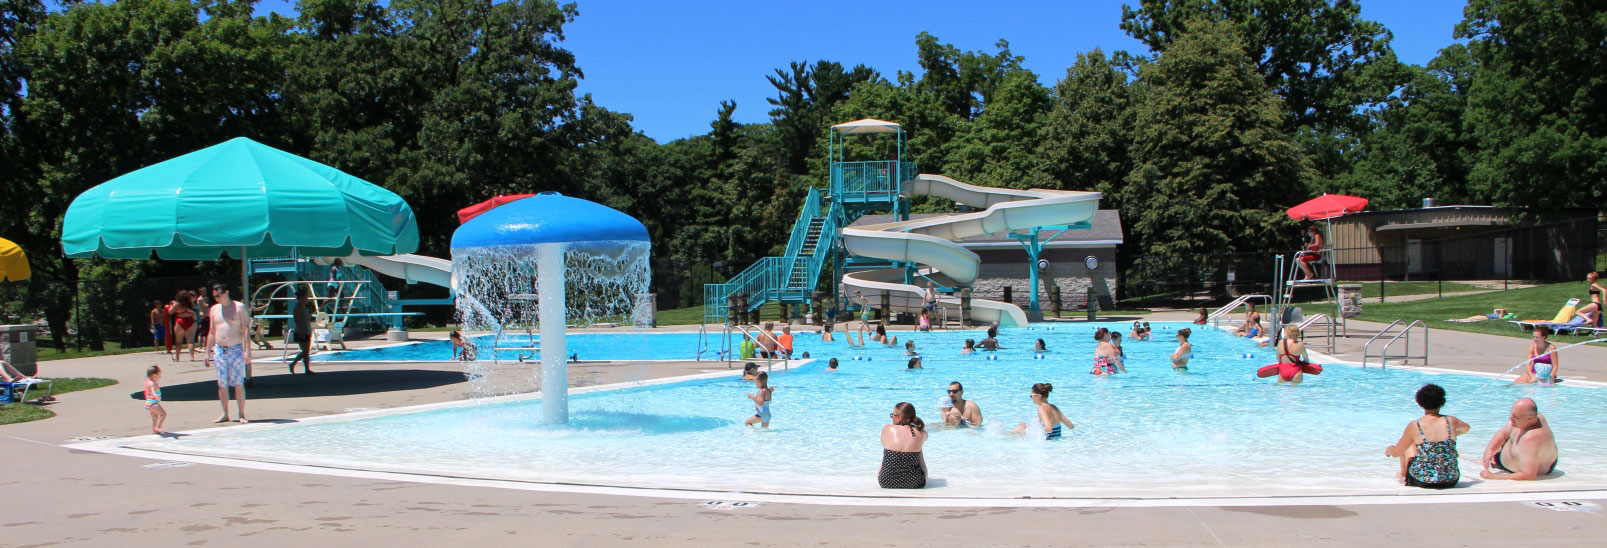 Swimmers at Bever Pool with the waterslide in the background